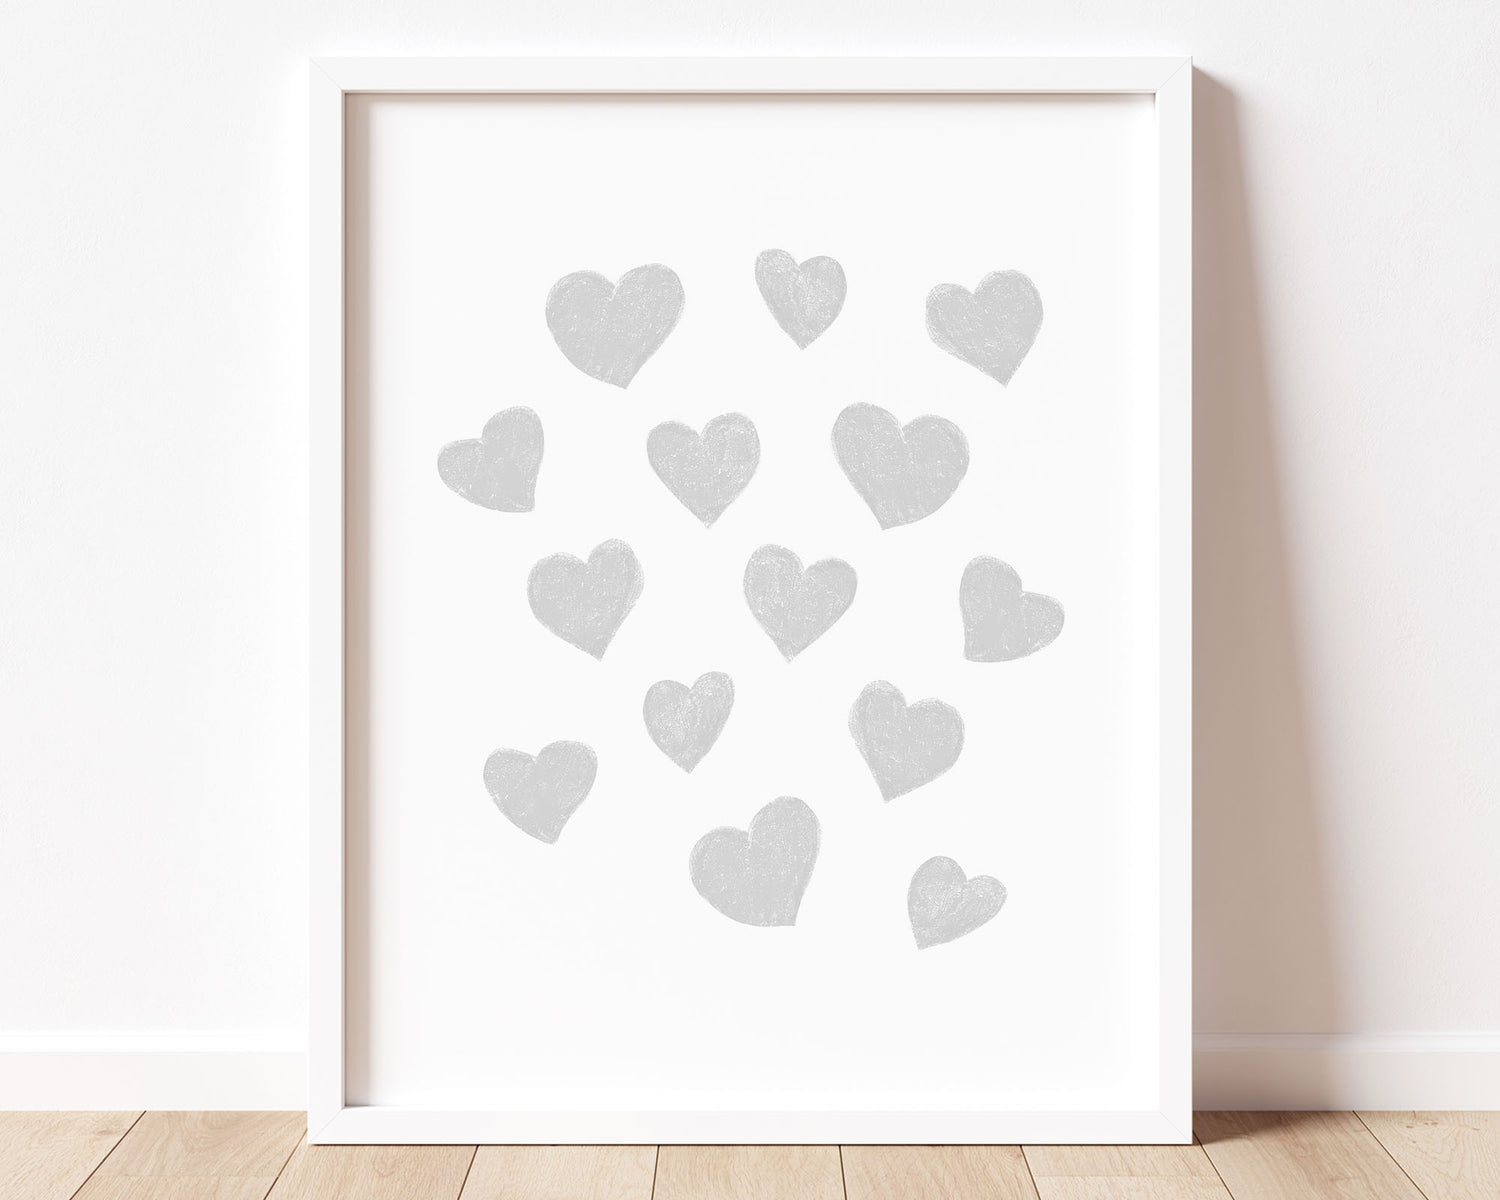 Pale silver gray small scattered hearts in chalky brushstroke illlustration style perfect for Baby Nursery Décor, Little Boys Bedroom Wall Art, Toddler Girls Room Wall Hangings, Kiddos Bathroom Wall Art and Childrens Playroom Décor.